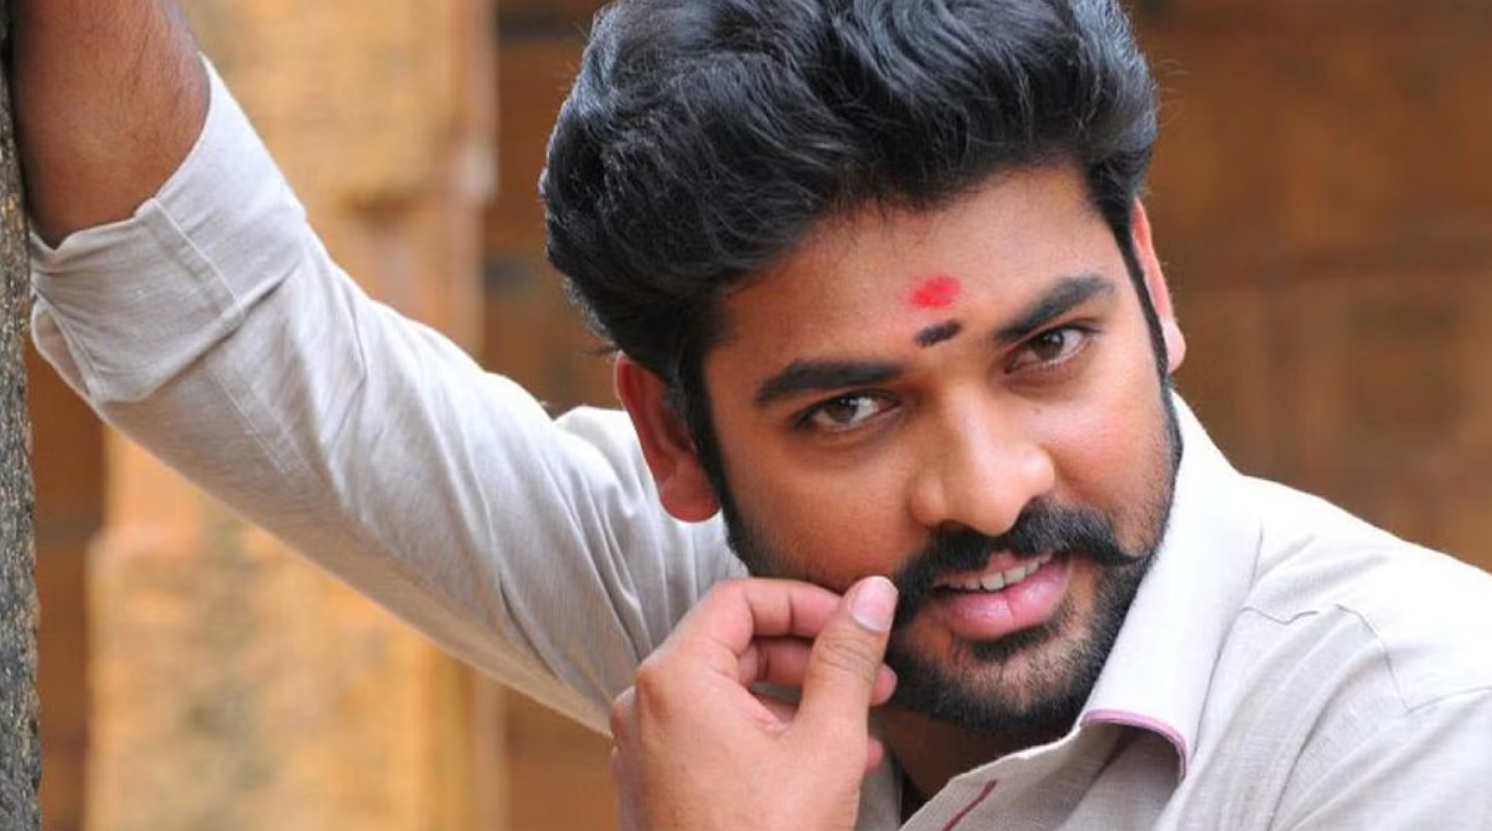 vimal posted video for rumours spreading on vimal health issue